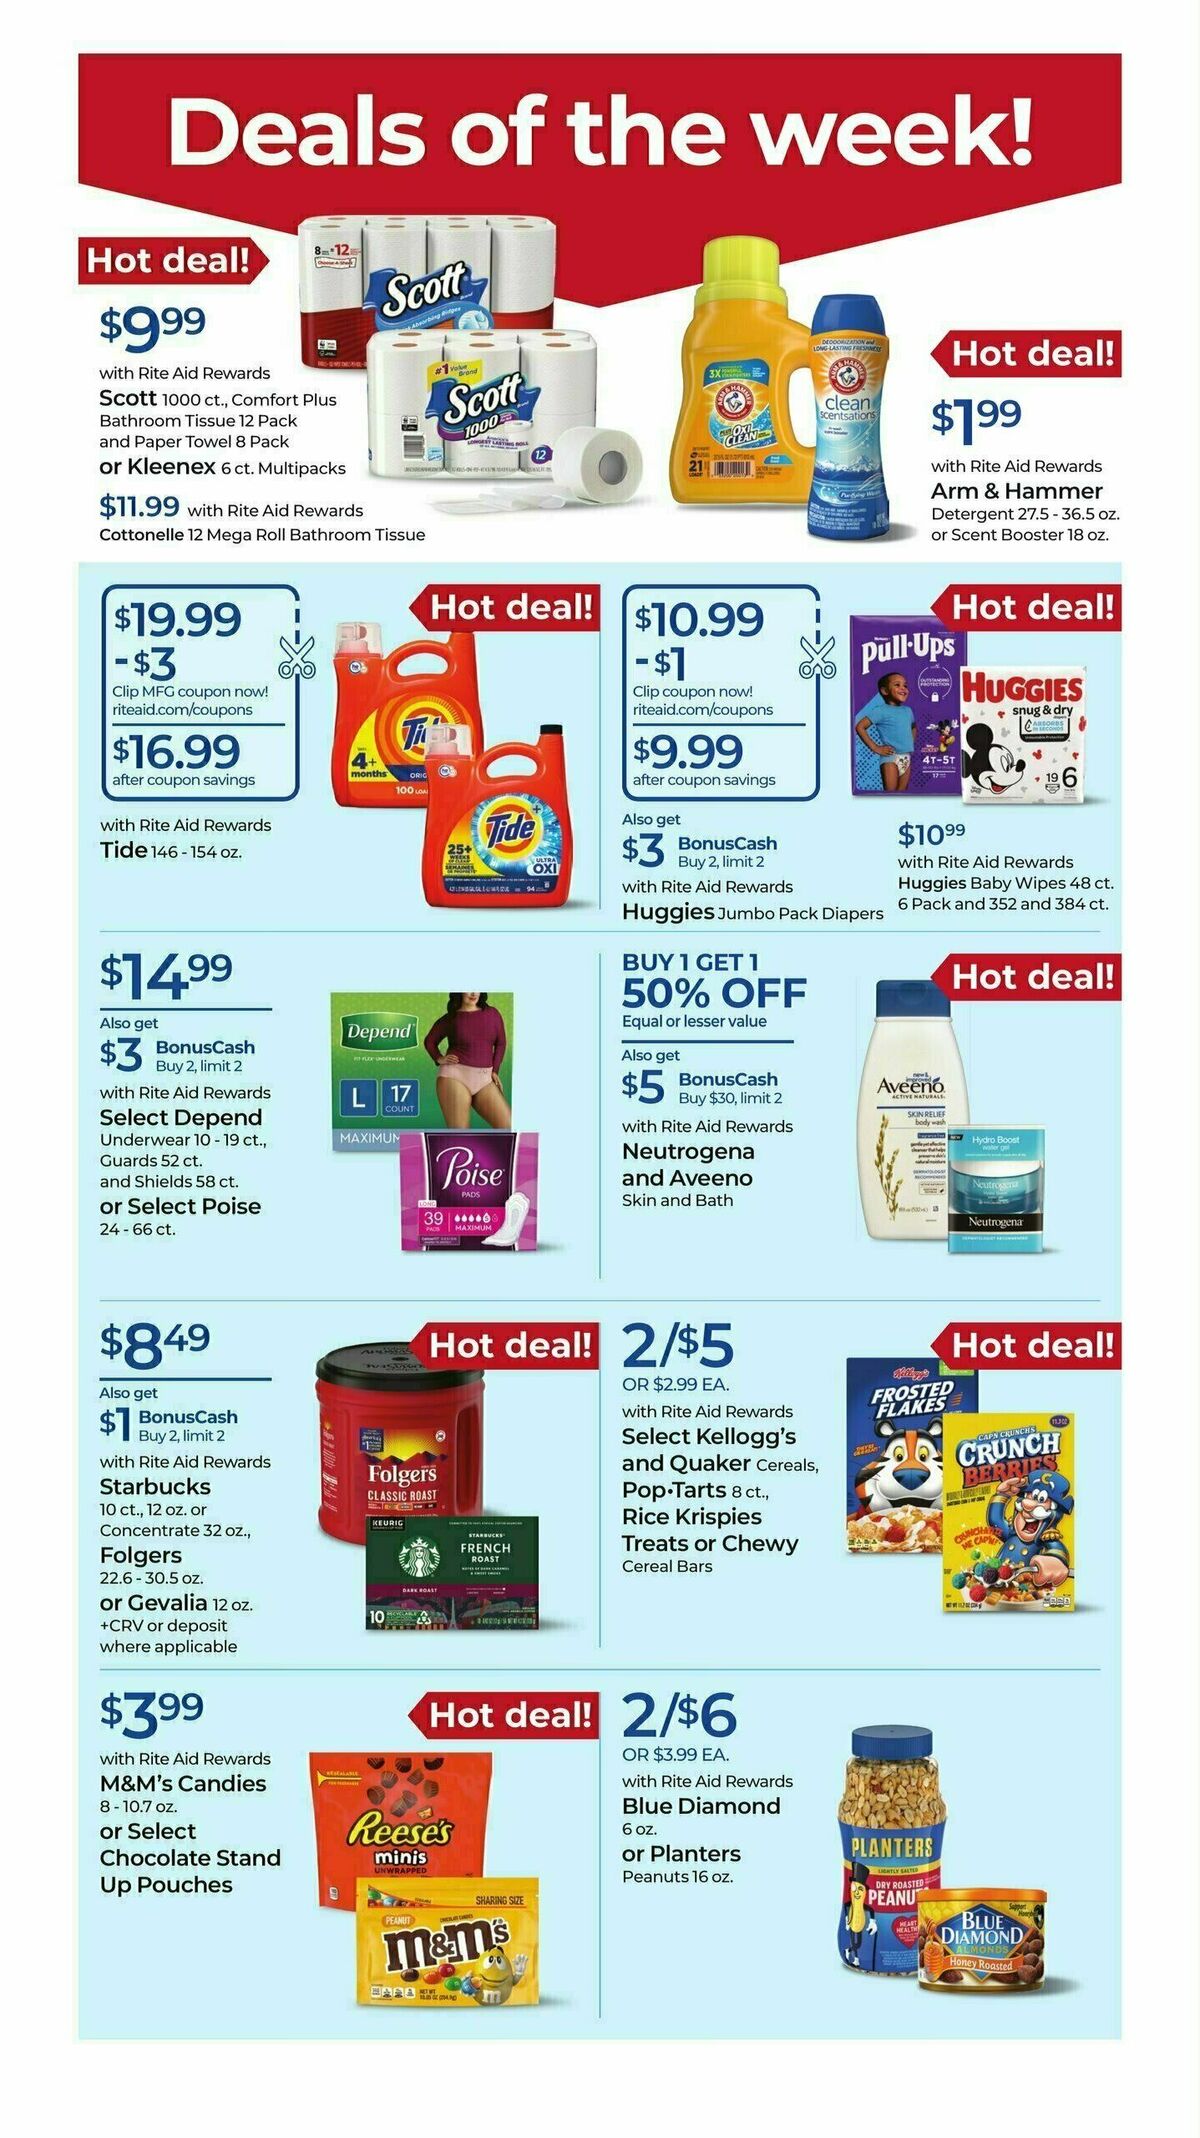 Rite Aid Weekly Ad from July 9